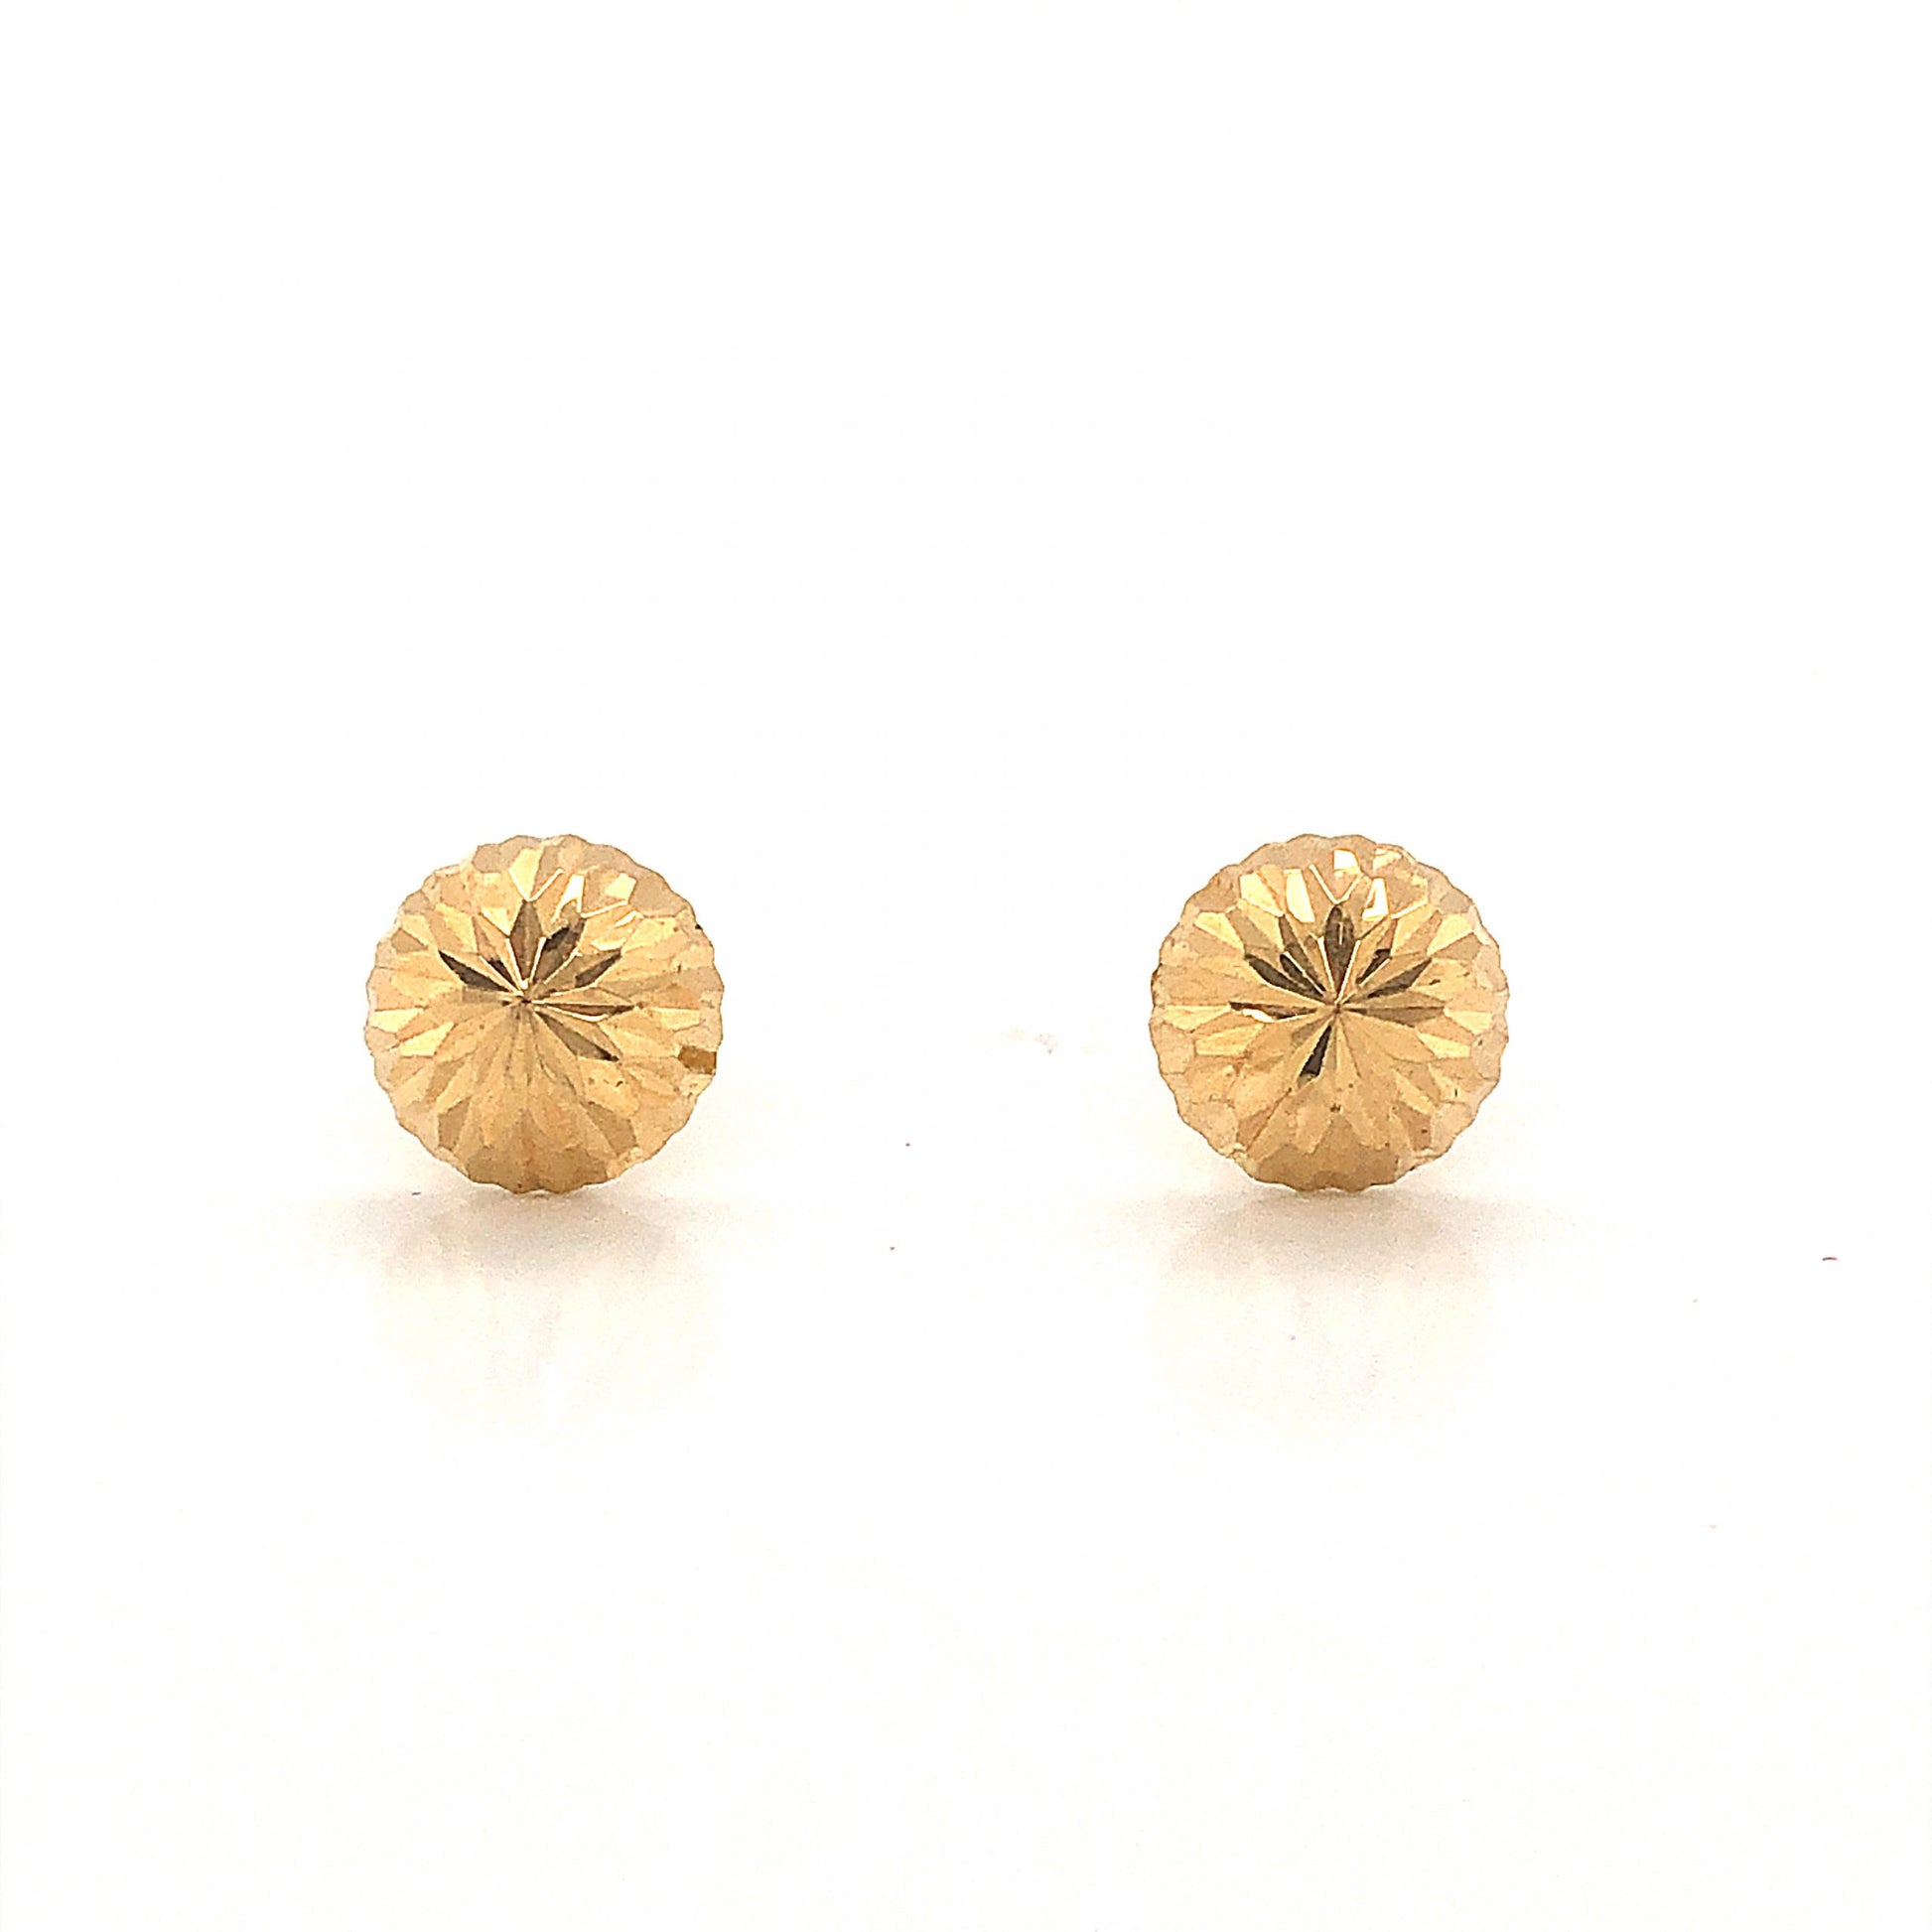 Small Textured Round Stud Earrings in 14k Yellow GoldComposition: Platinum Total Gram Weight: .70 g Inscription: 14k 
      